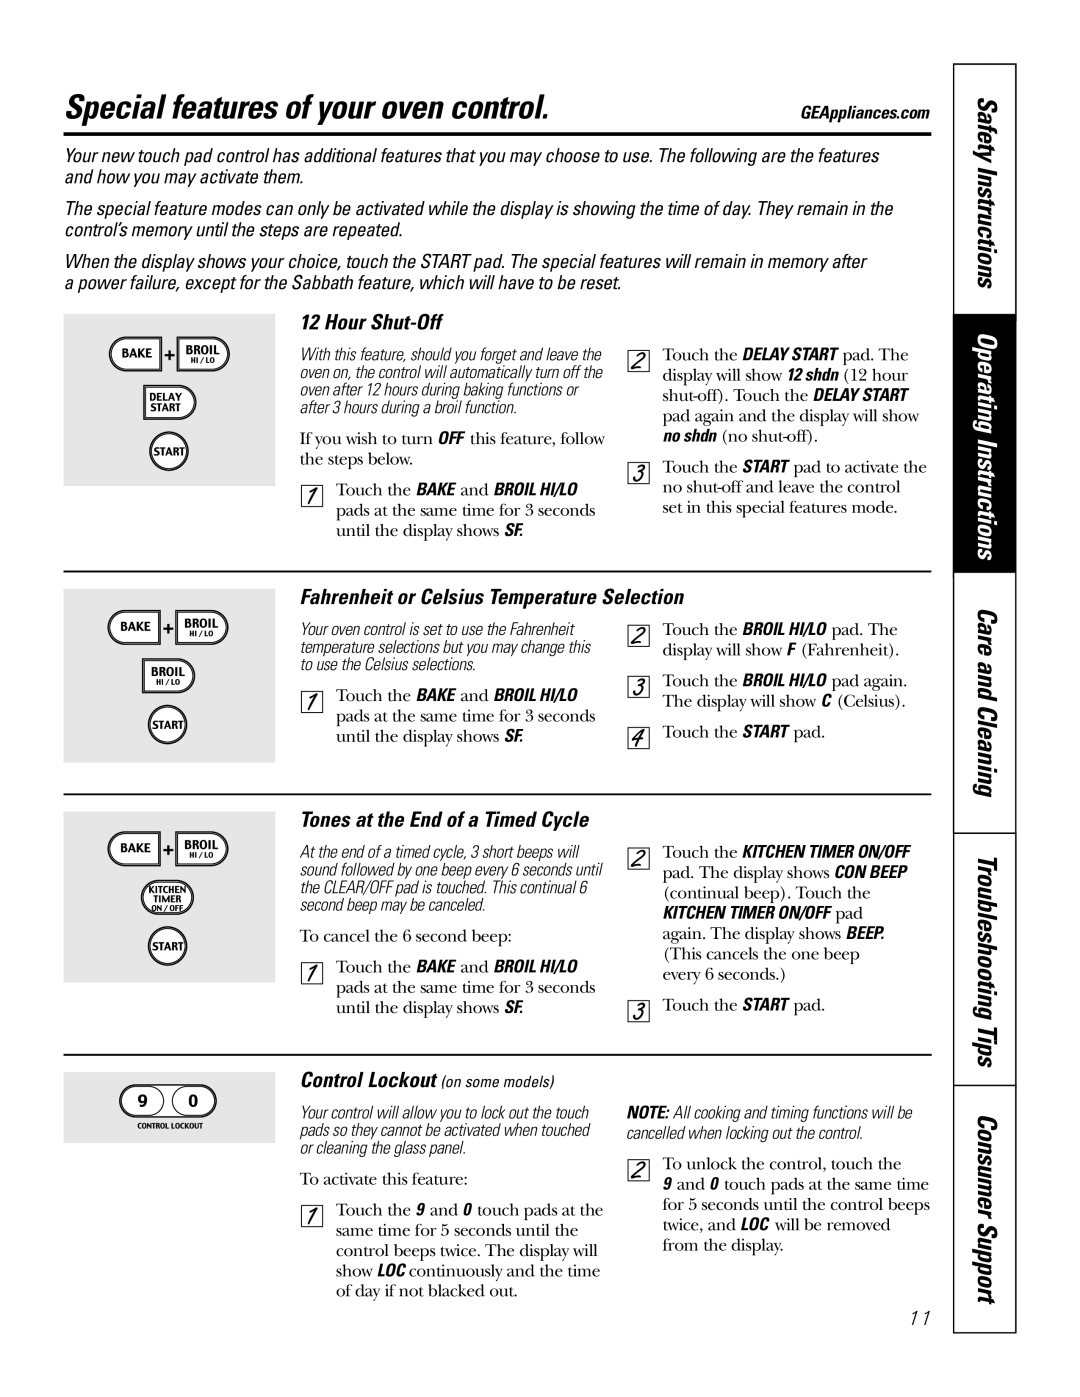 GE 164D4290P075-1 Special features of your oven control, Safety Instructions, Operating Instructions, Troubleshooting Tips 